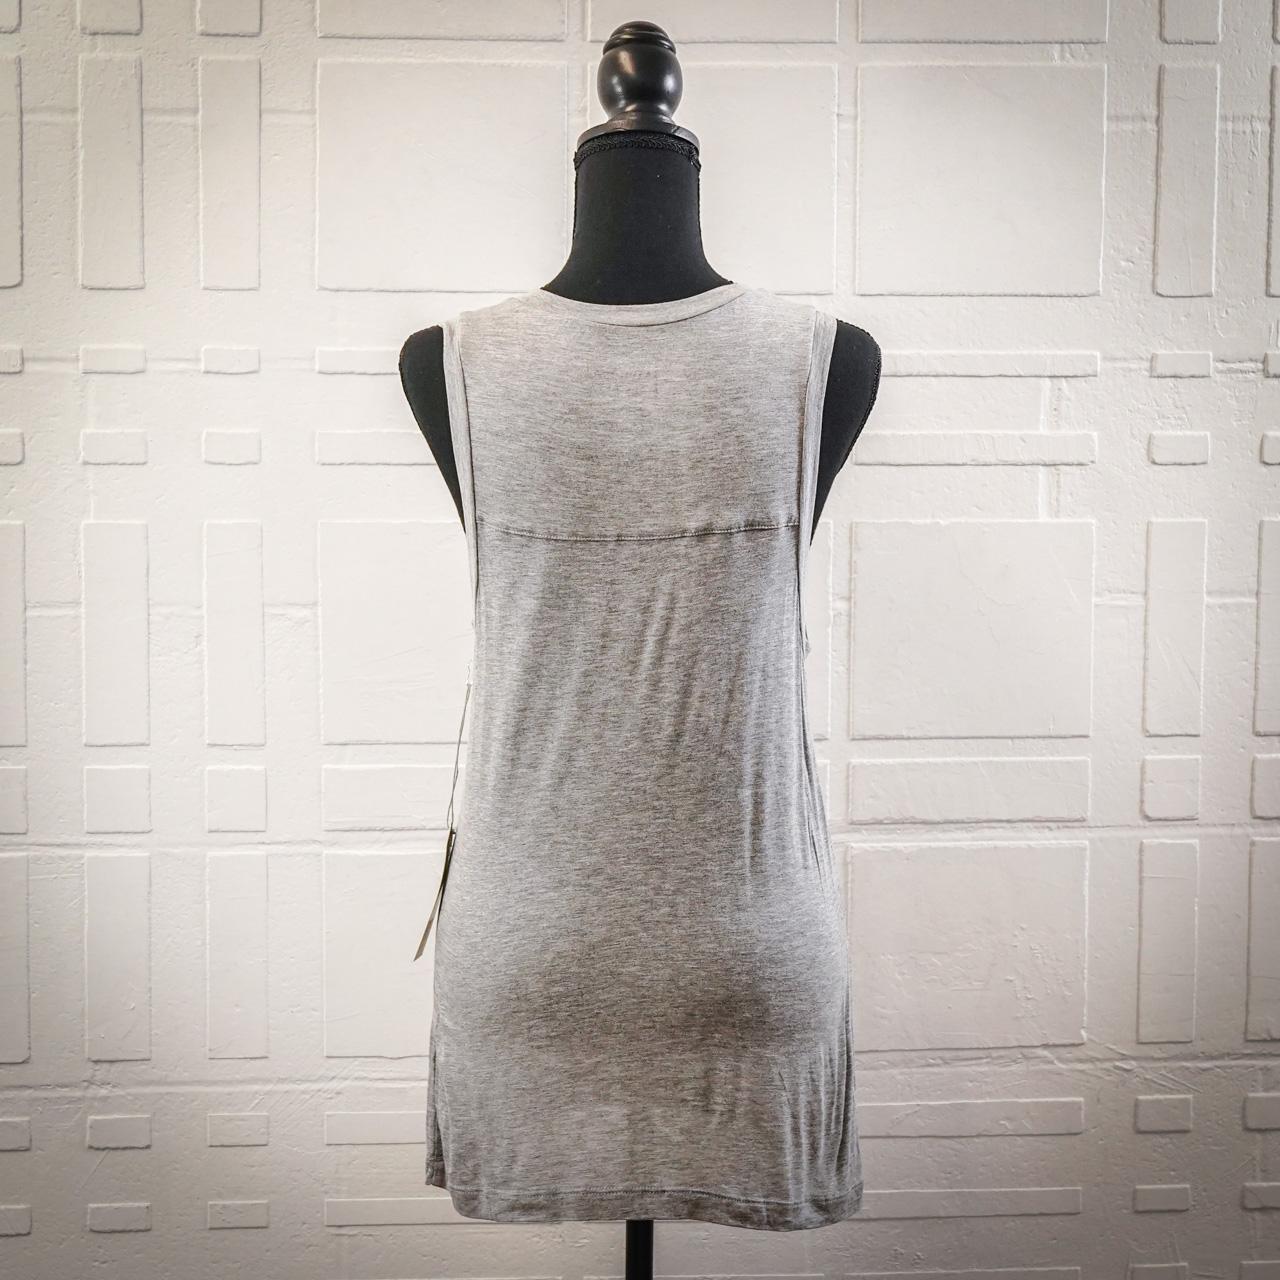 Getting Back To Square One Women's Grey Vest (2)